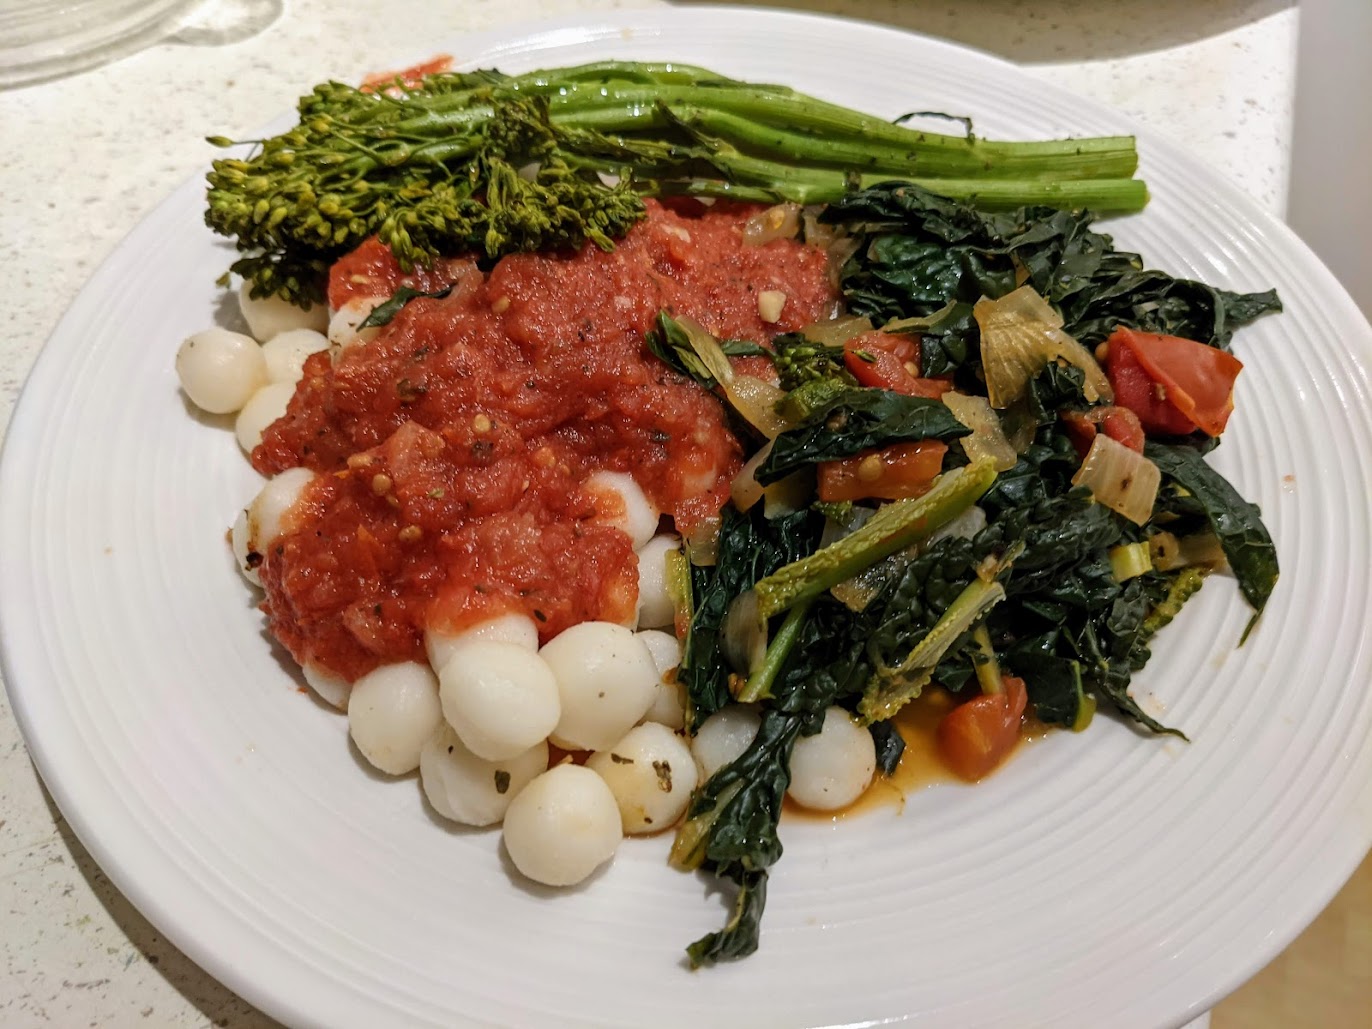 Baby gnocchi, with roasted pasta sauce, broccolini and kale greens.